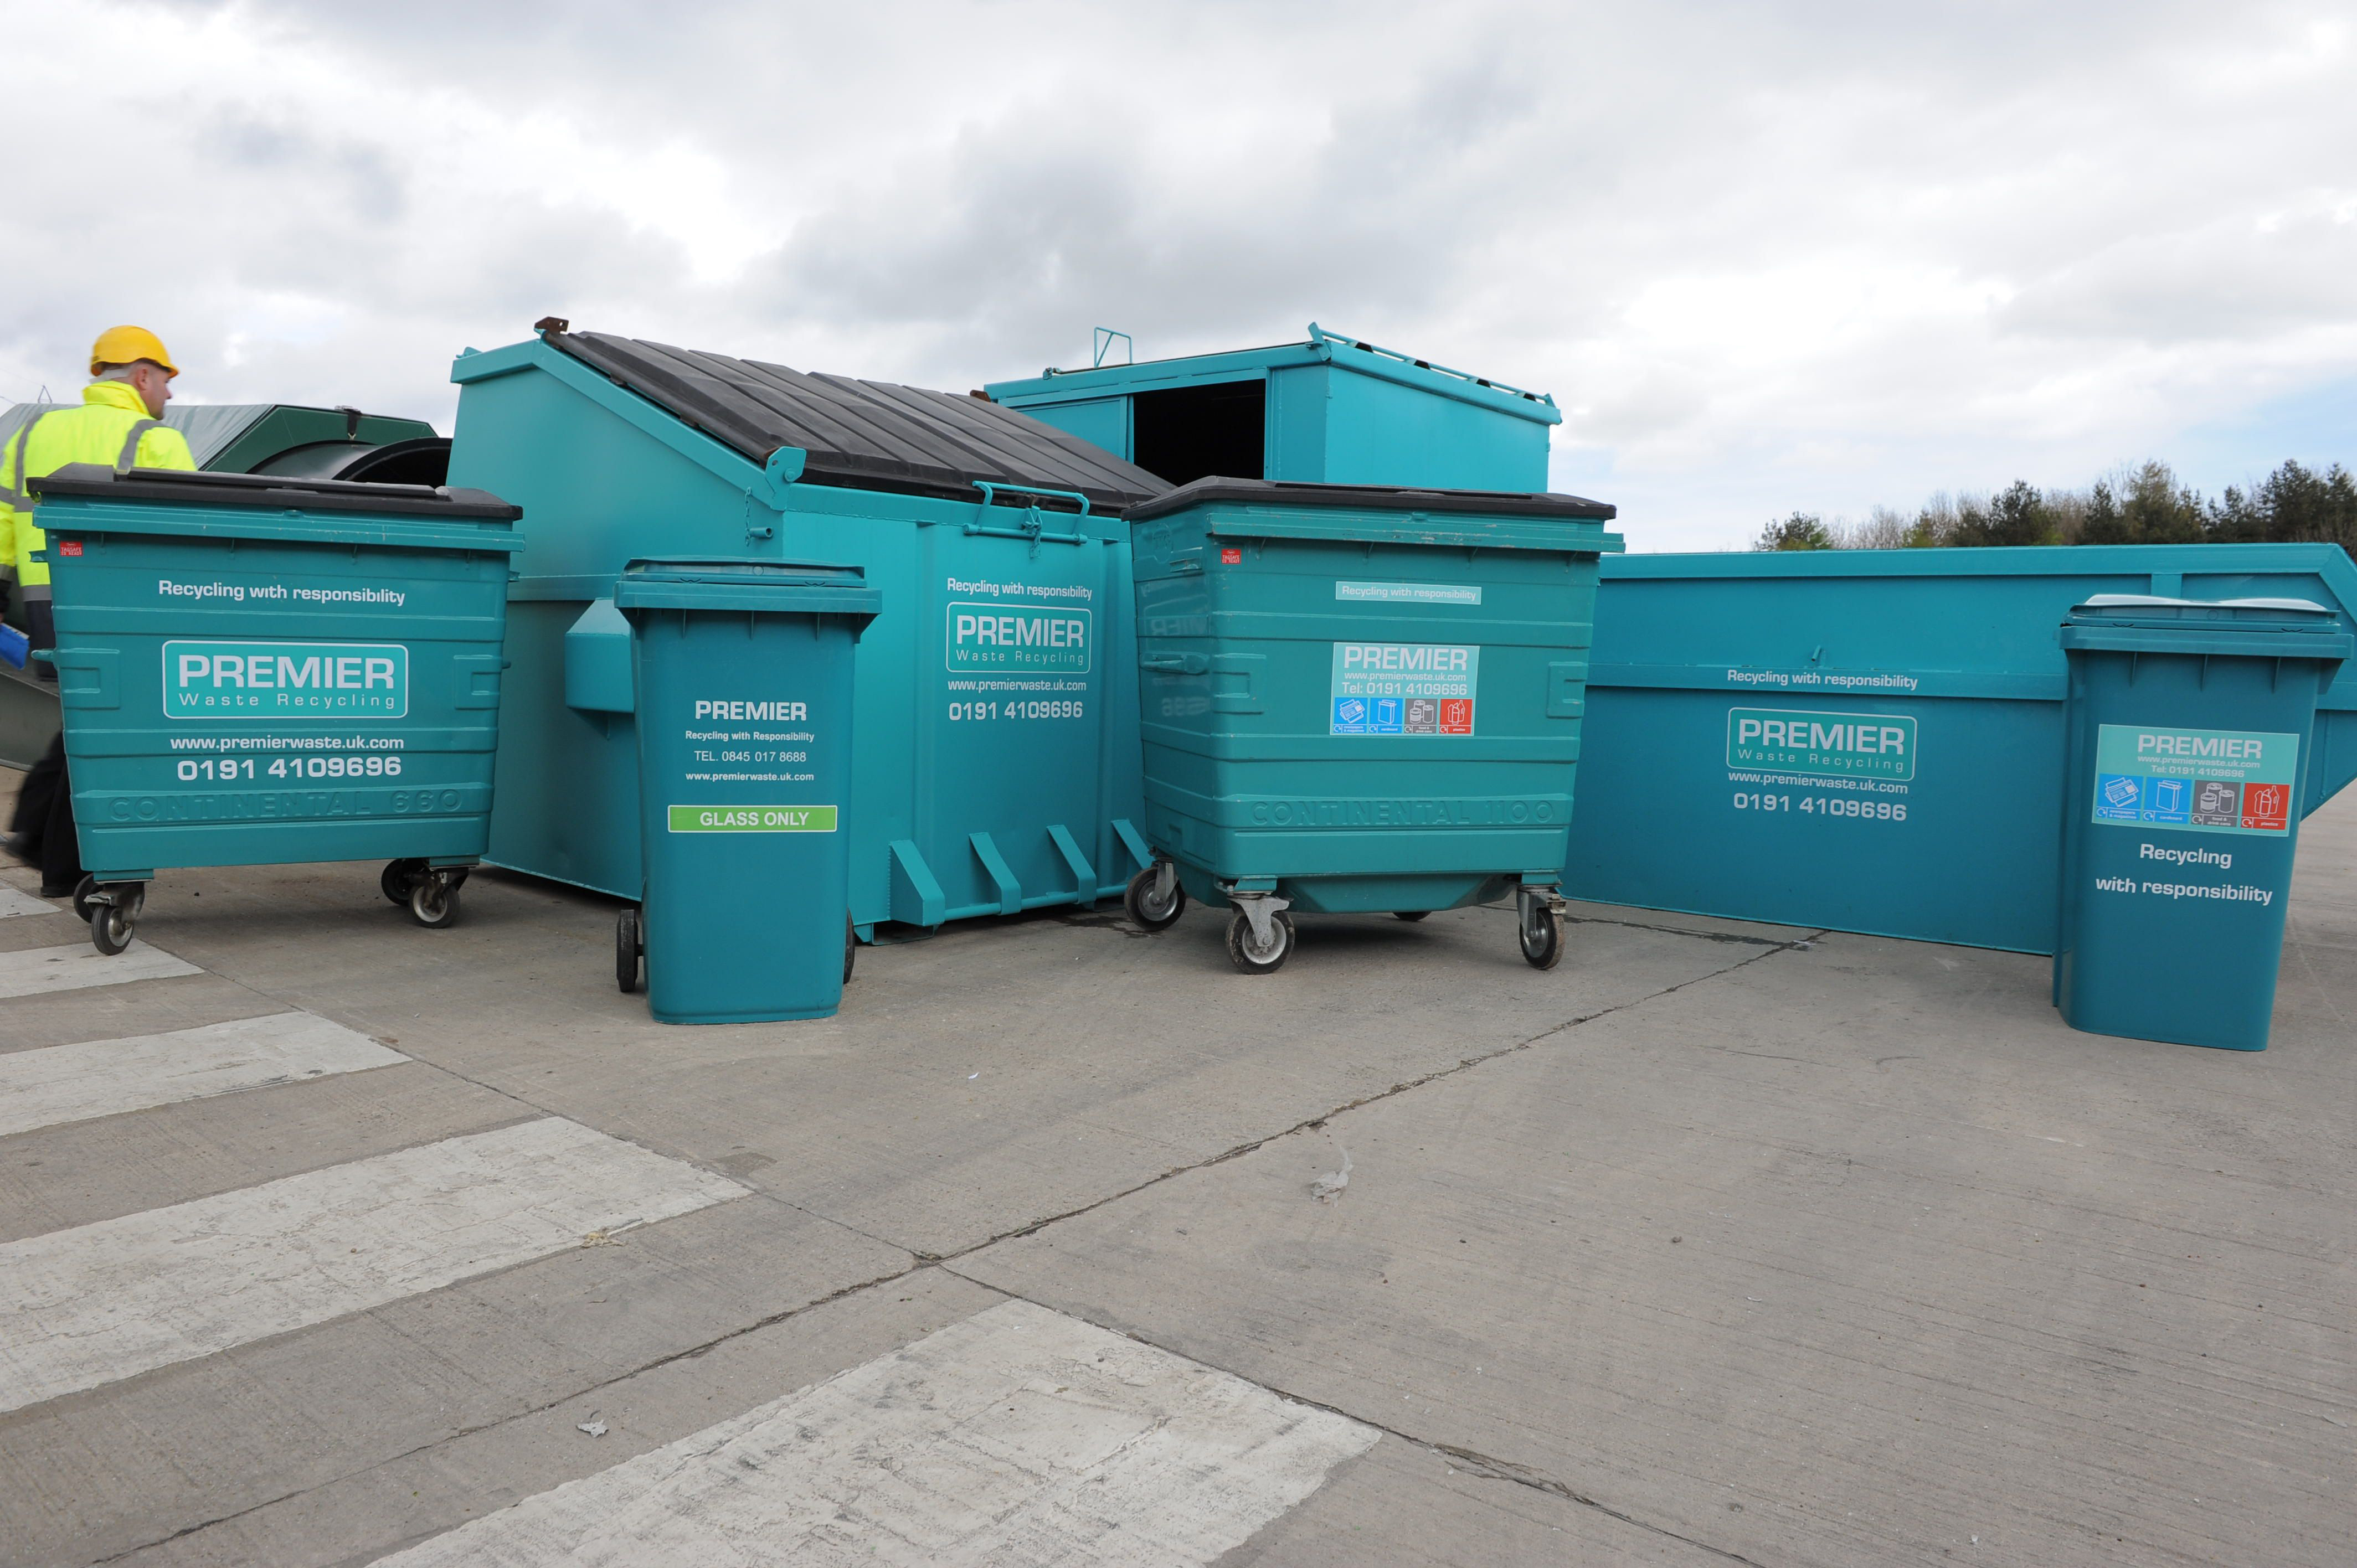 Commercial Waste Collection Amp Recycling Services - Bank2home.com